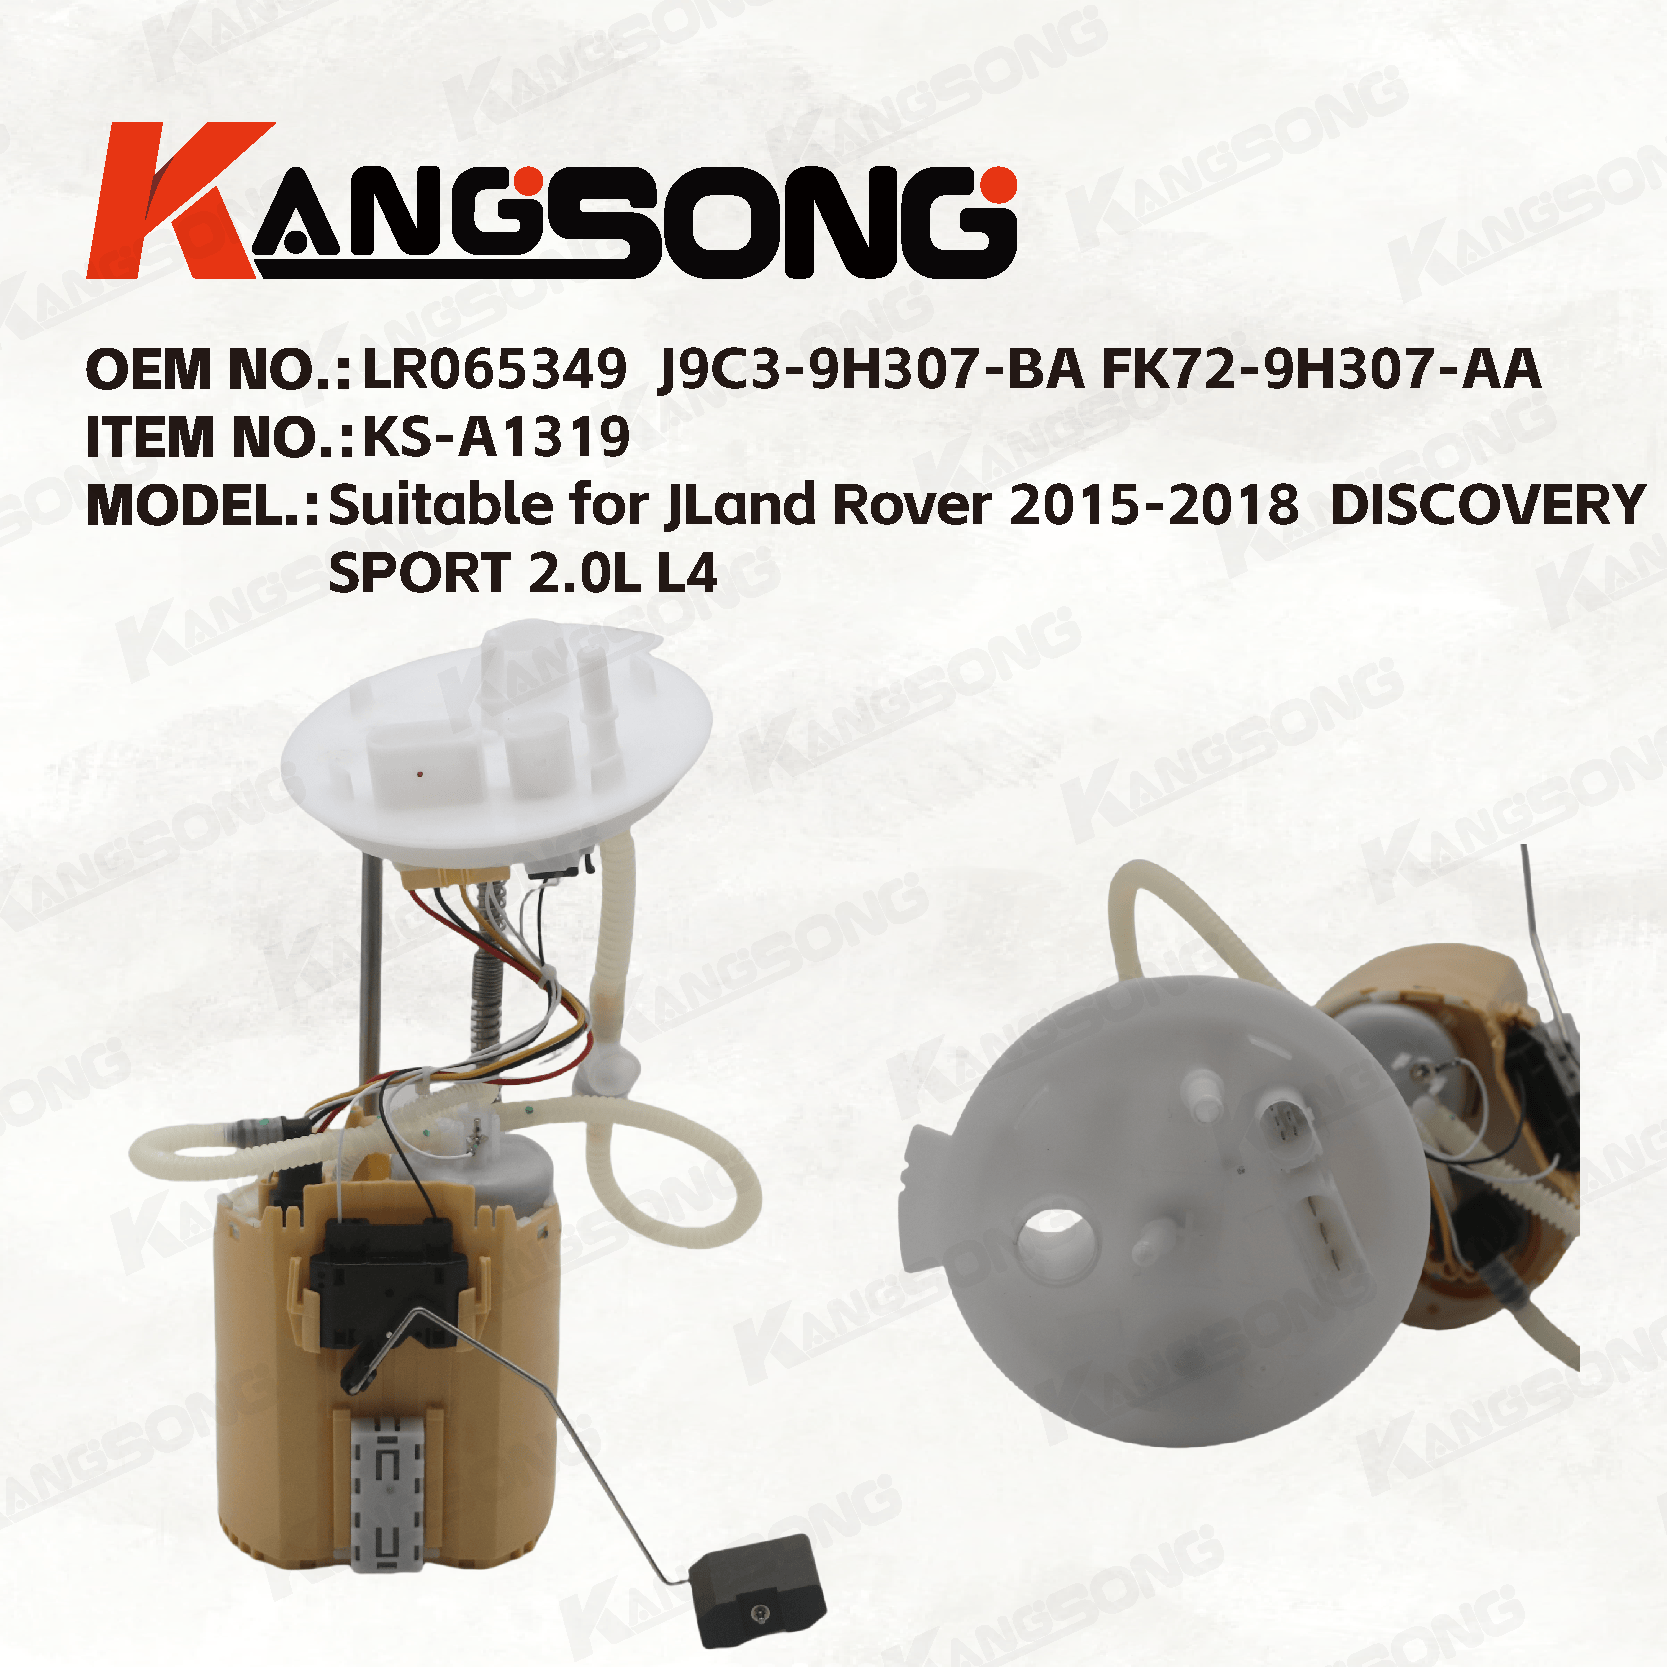 Applicable to Land Rover 2015-2018  DISCOVERY SPORT 2.0L L4/ LR065349 J9C3-9H307-BA FK72-9H307-AA /Fuel Pump Assembly/KS-A1319